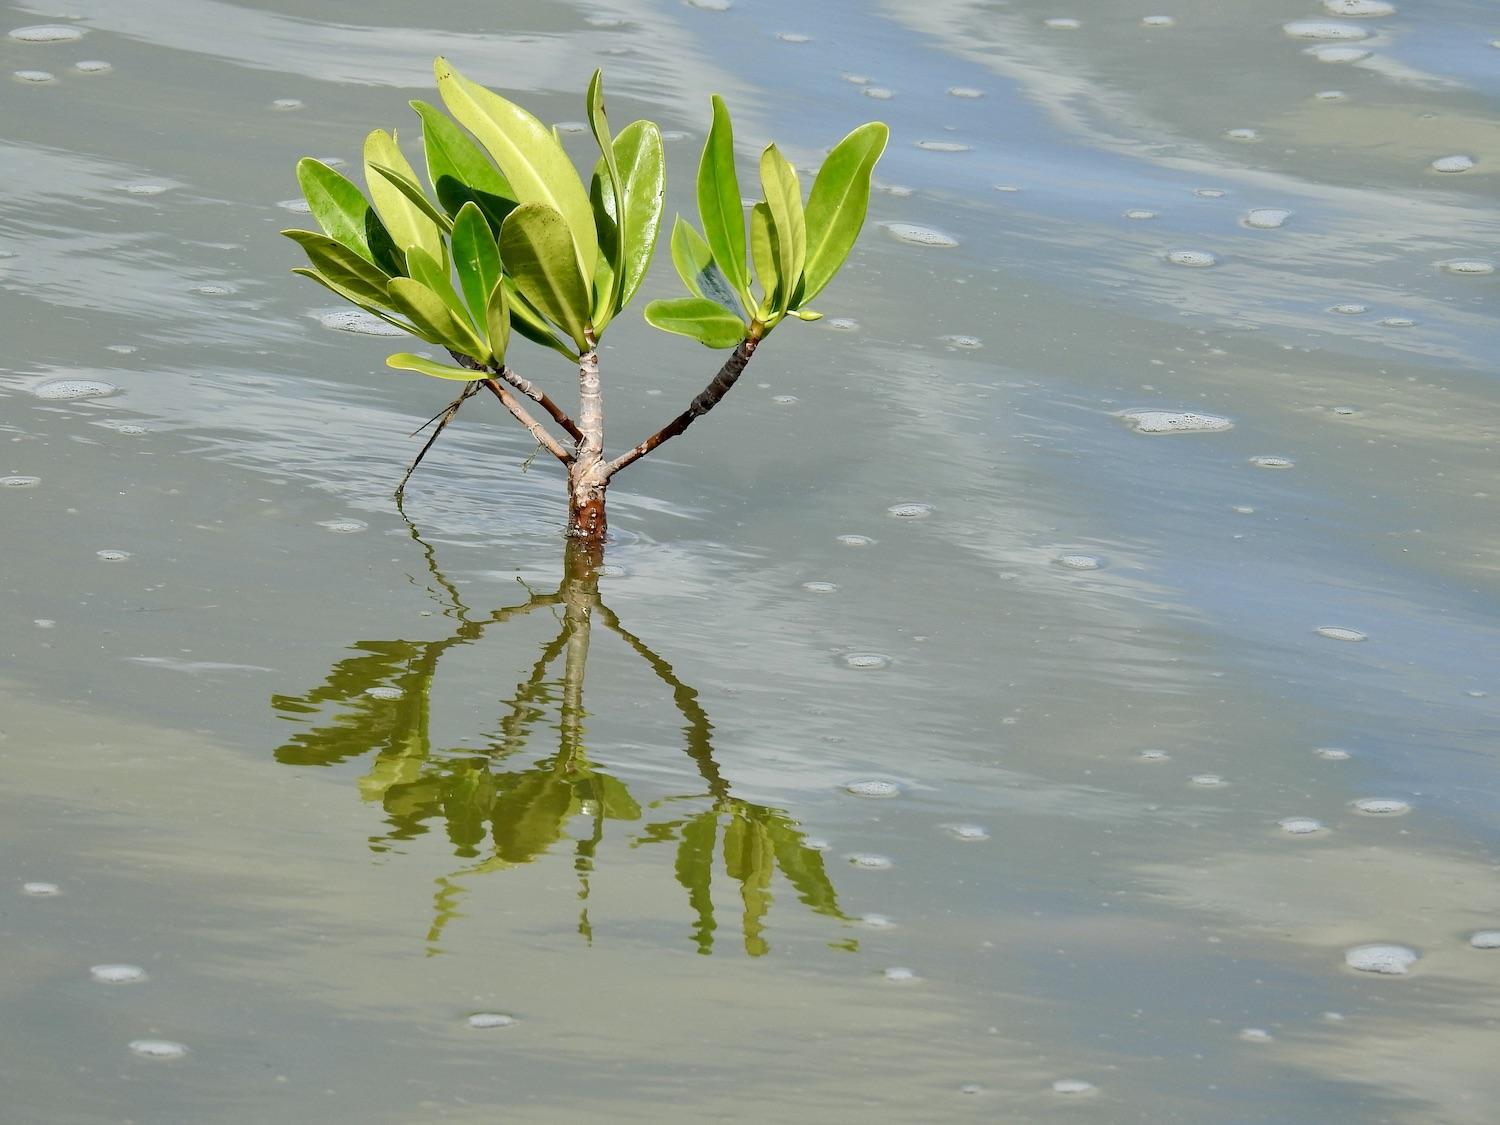 A young red mangrove planted by tourists on an eco tour at Saline d'Orient.